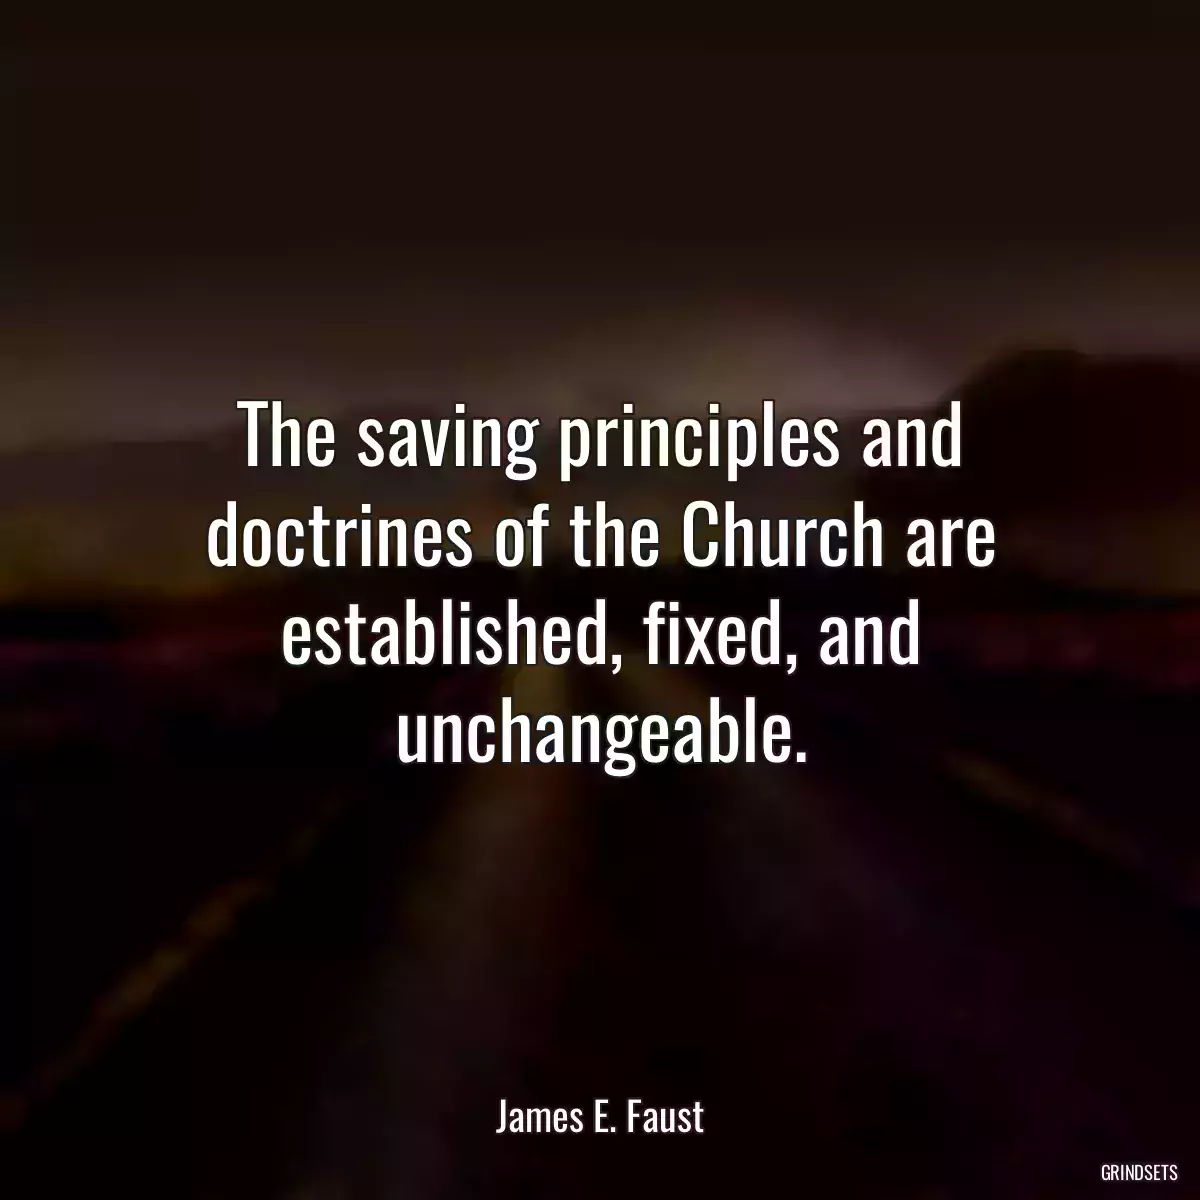 The saving principles and doctrines of the Church are established, fixed, and unchangeable.